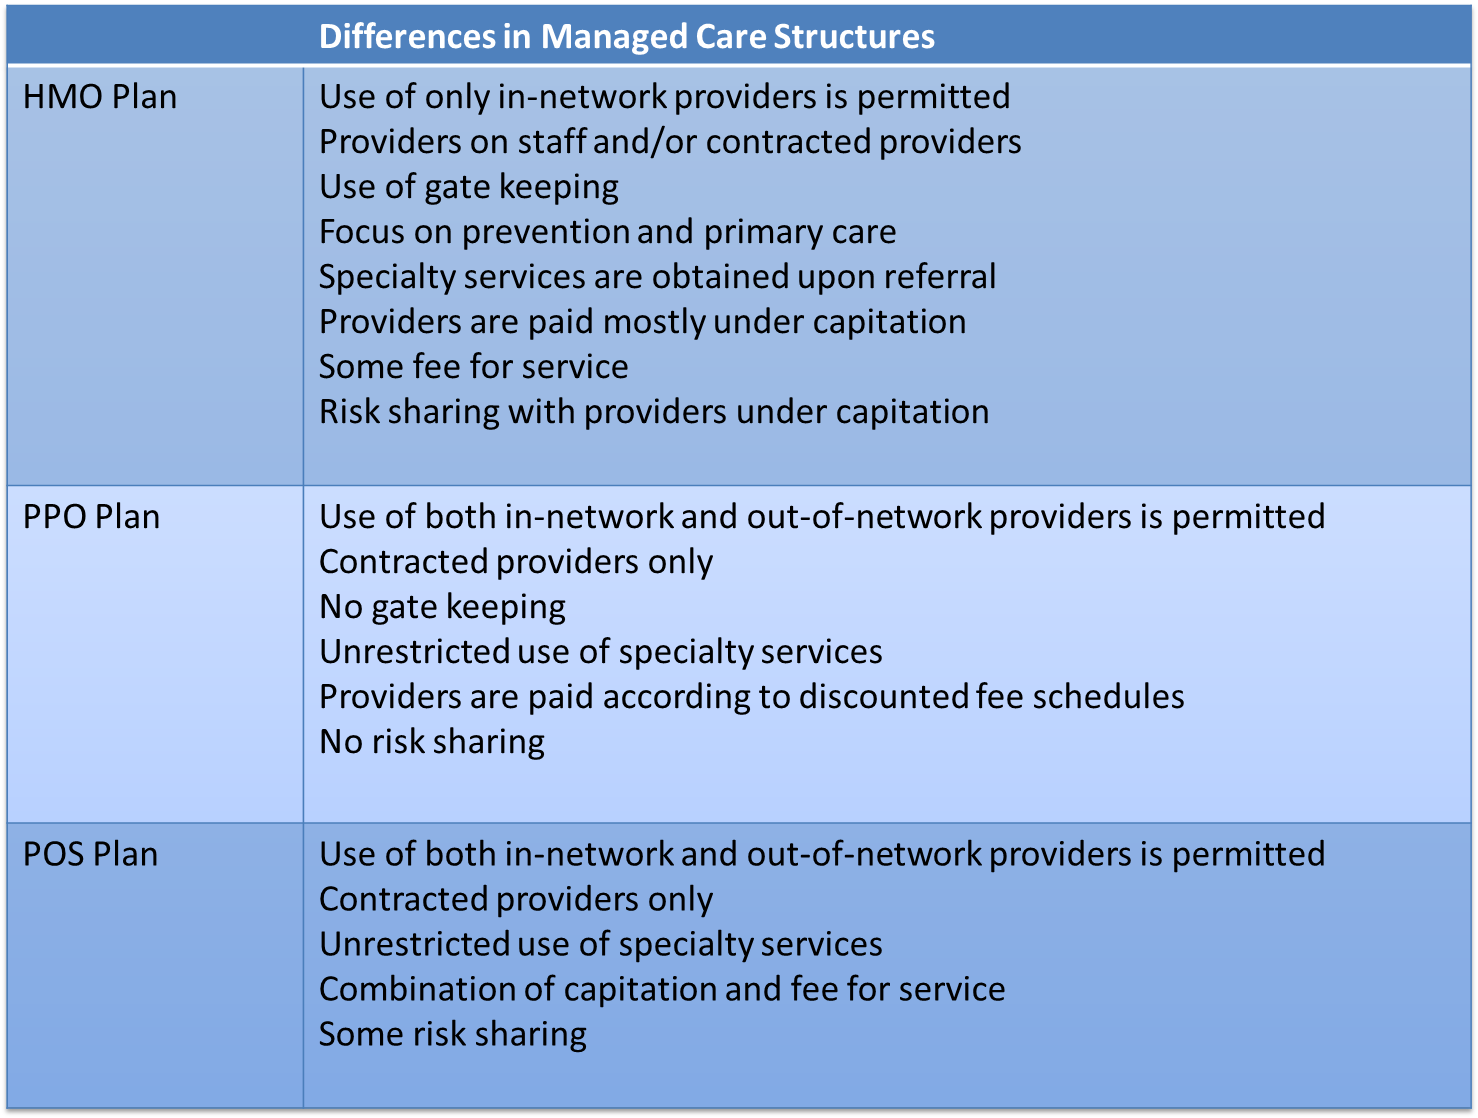 Differences in Managed Care Structures.png